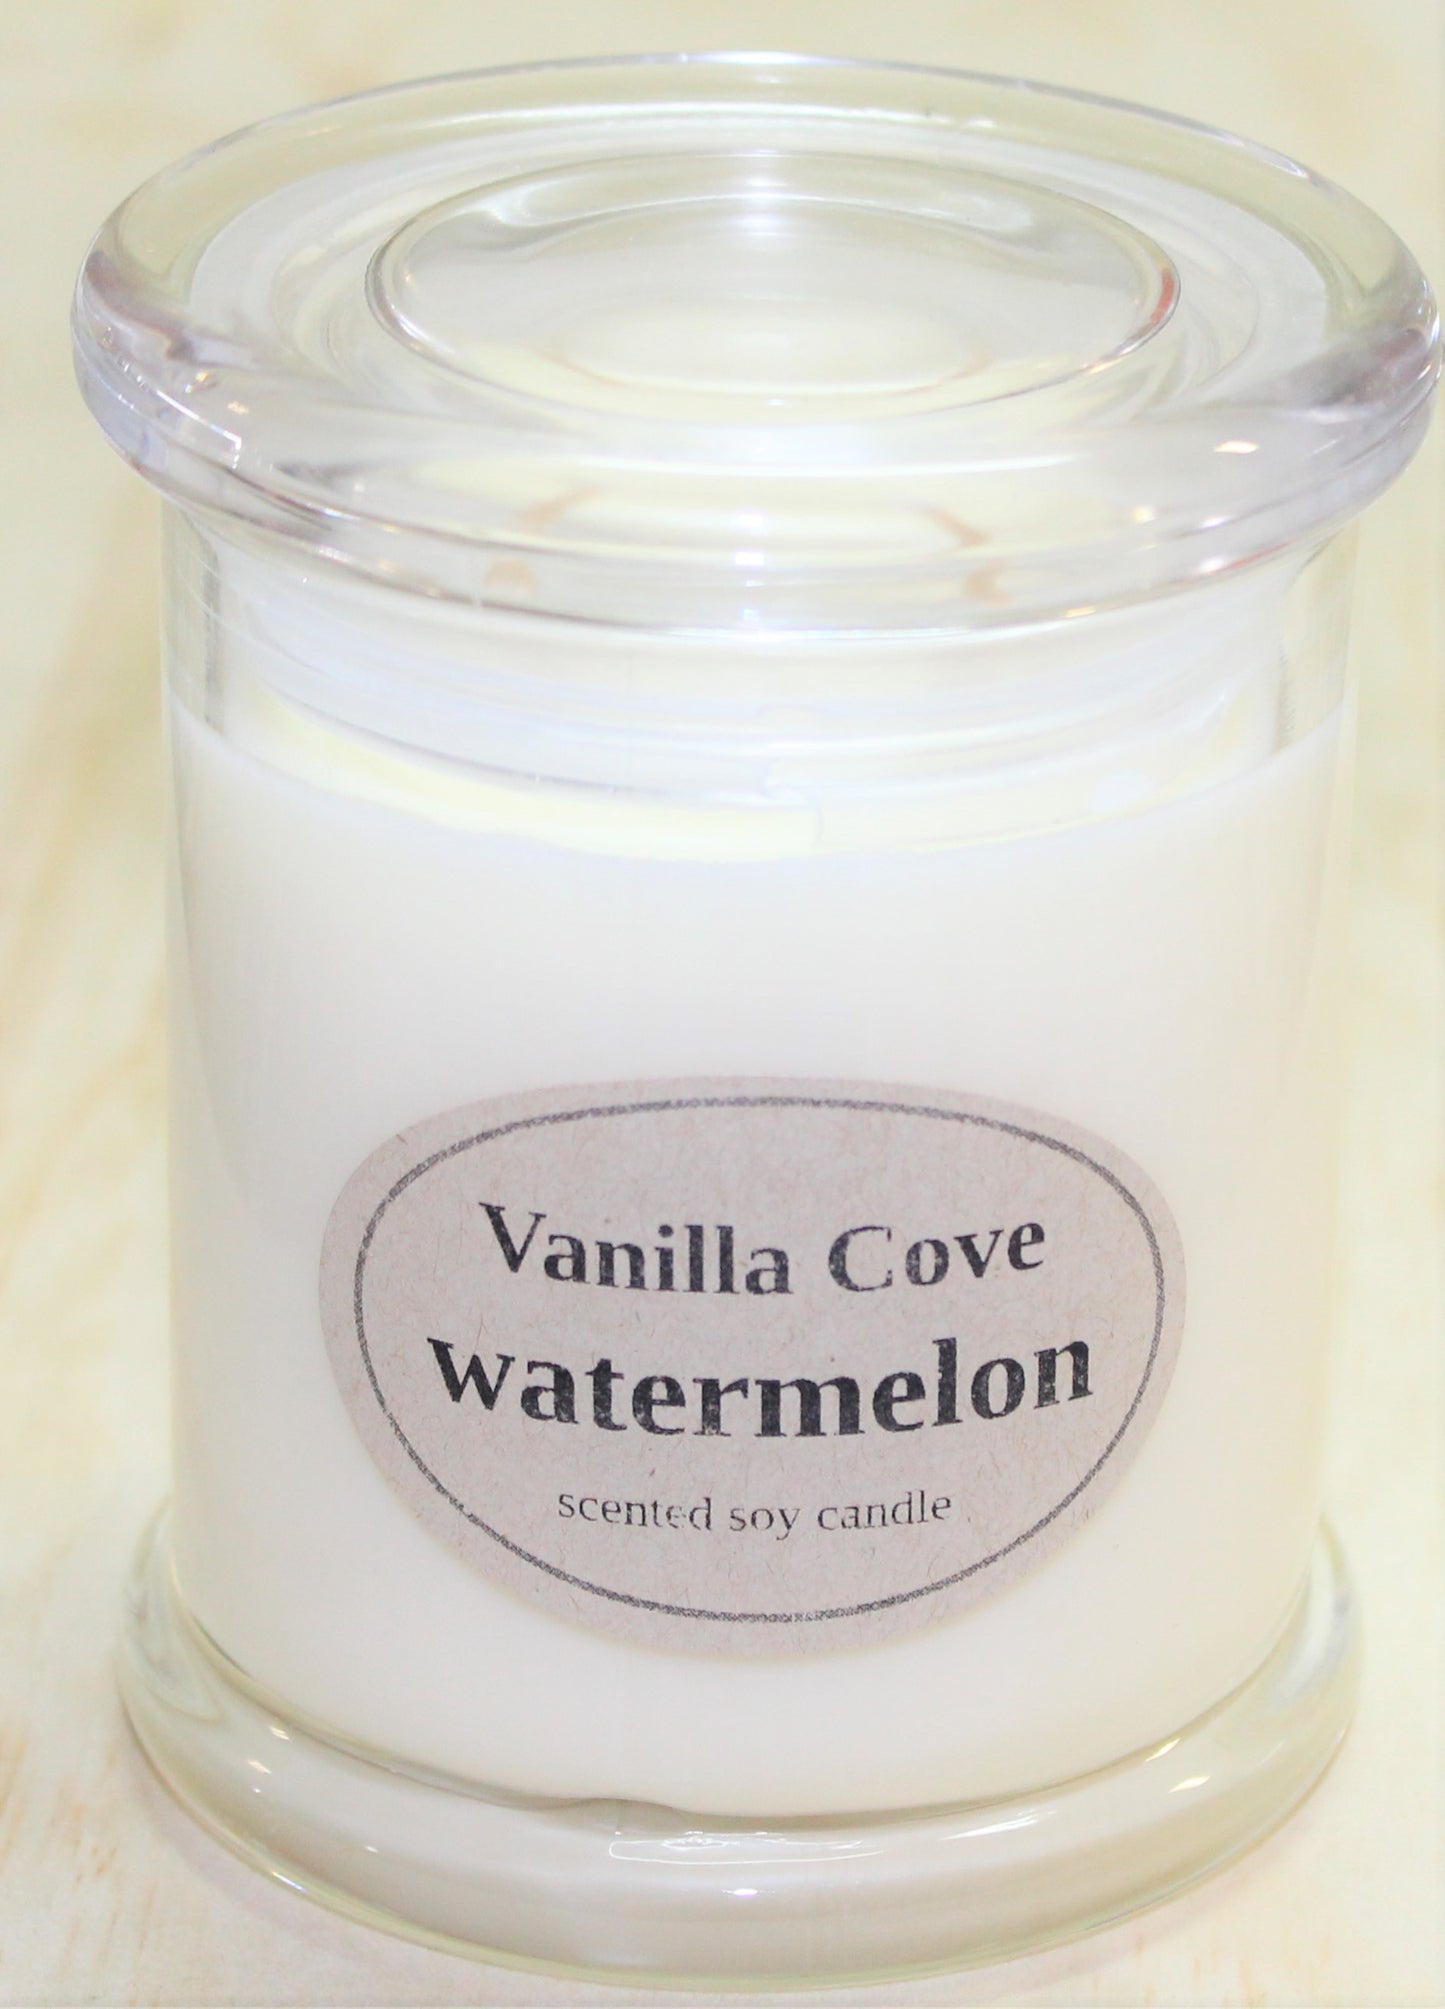 Vanilla Cove Soy Candle 50 hour Watermelon Fragrance in clear glass jar and glass lid